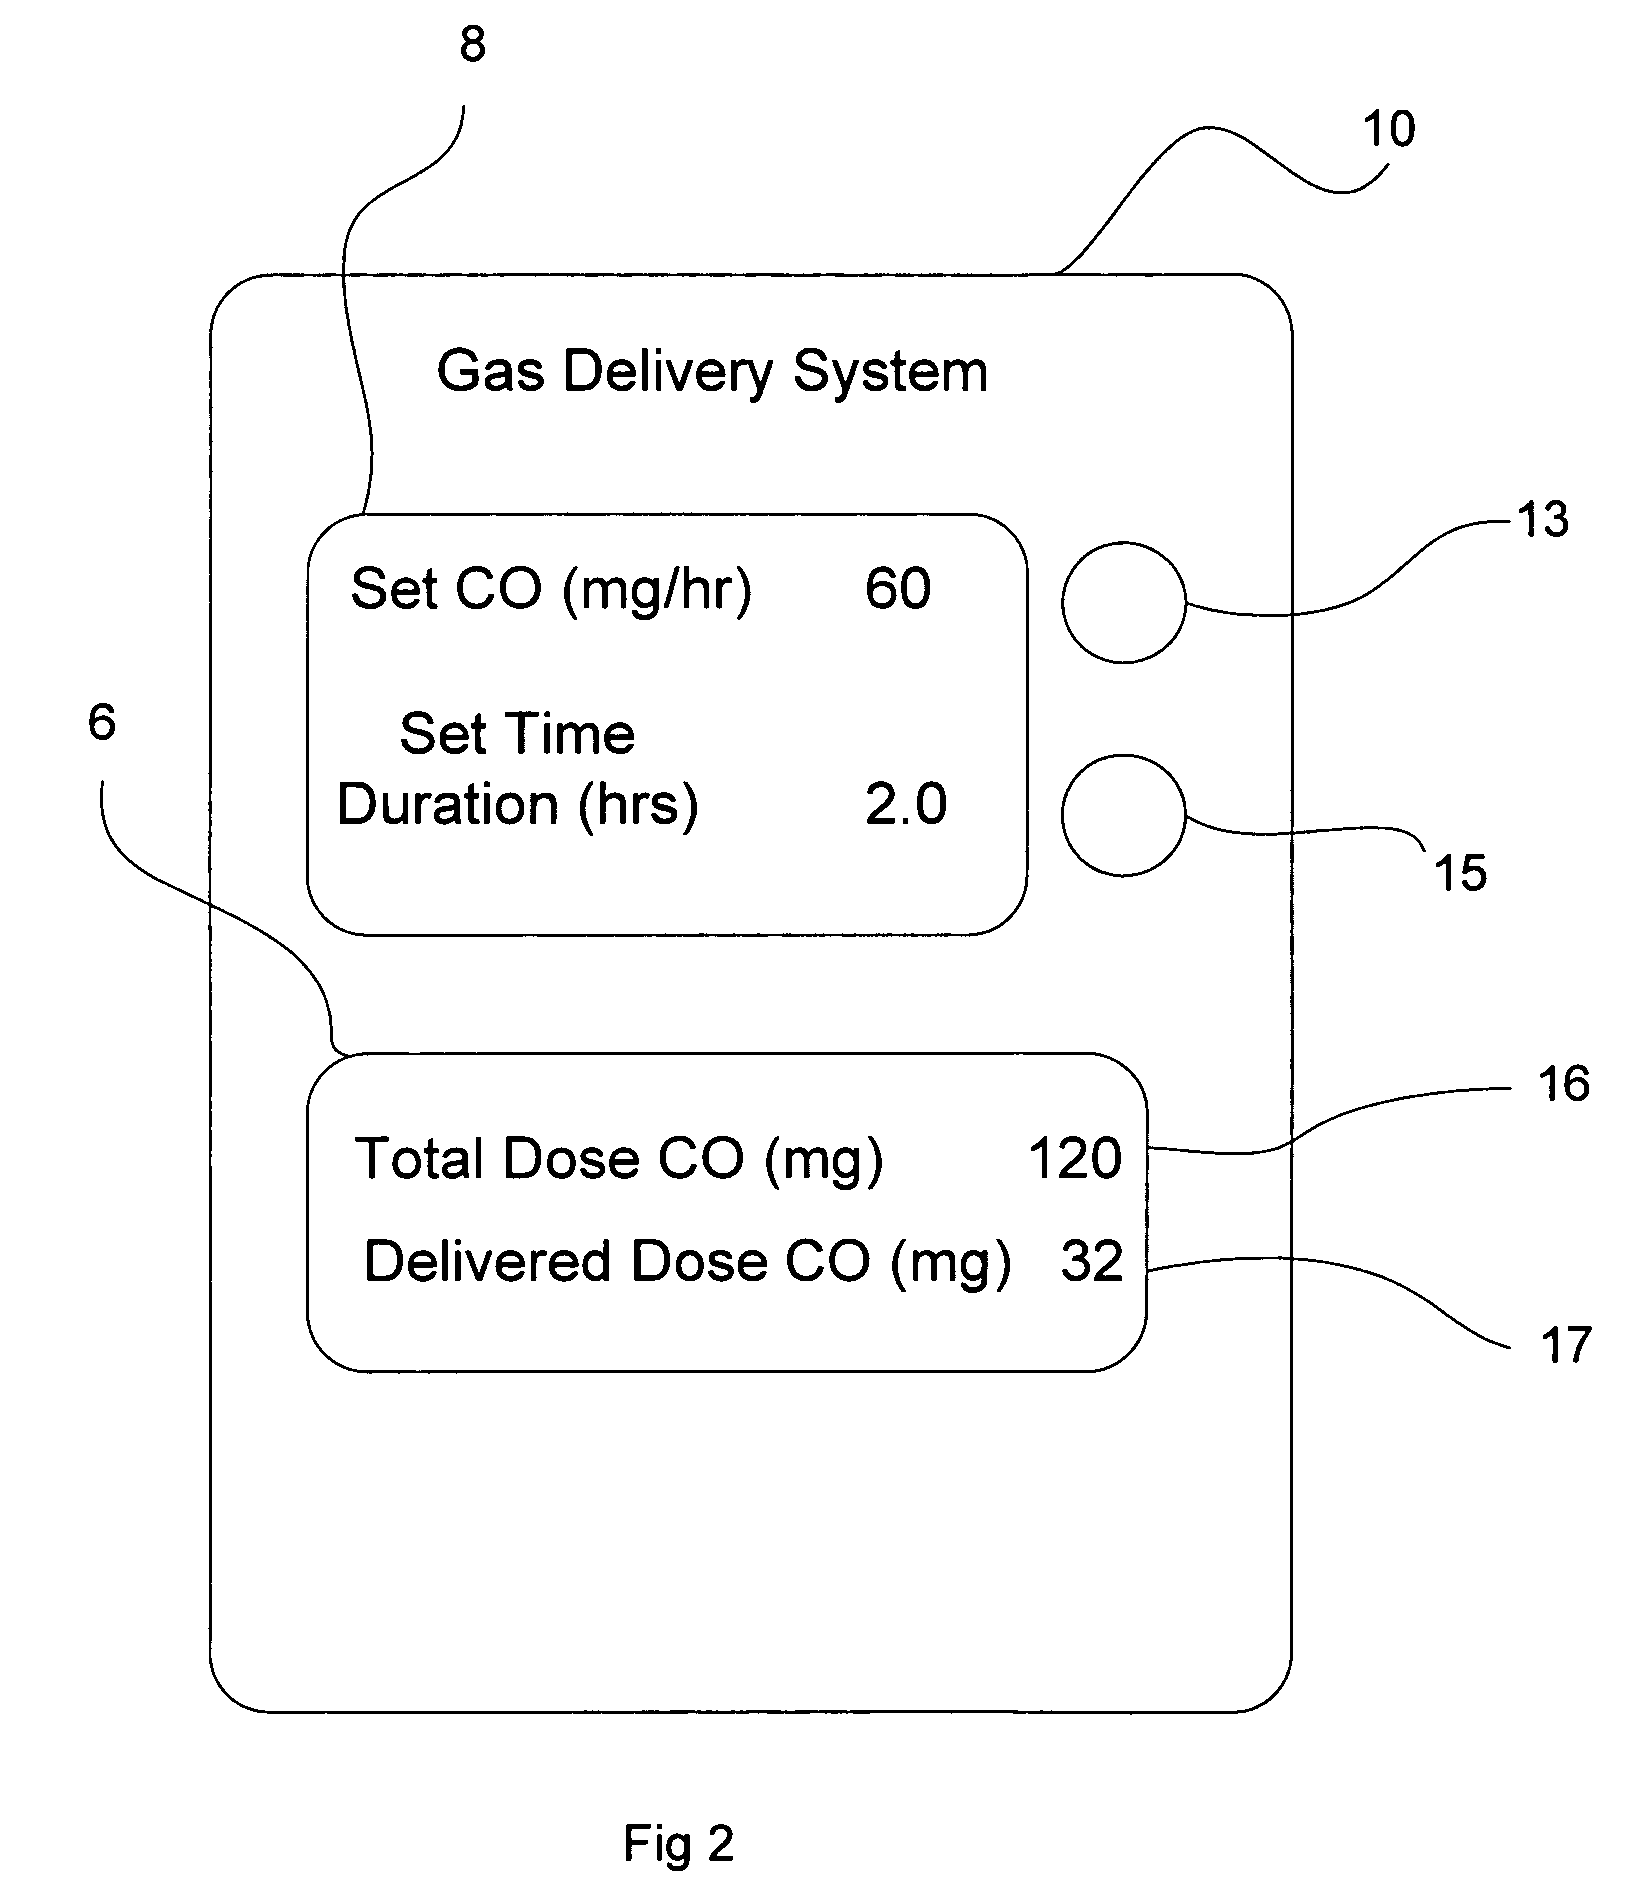 System and method of administering a pharmaceutical gas to a patient